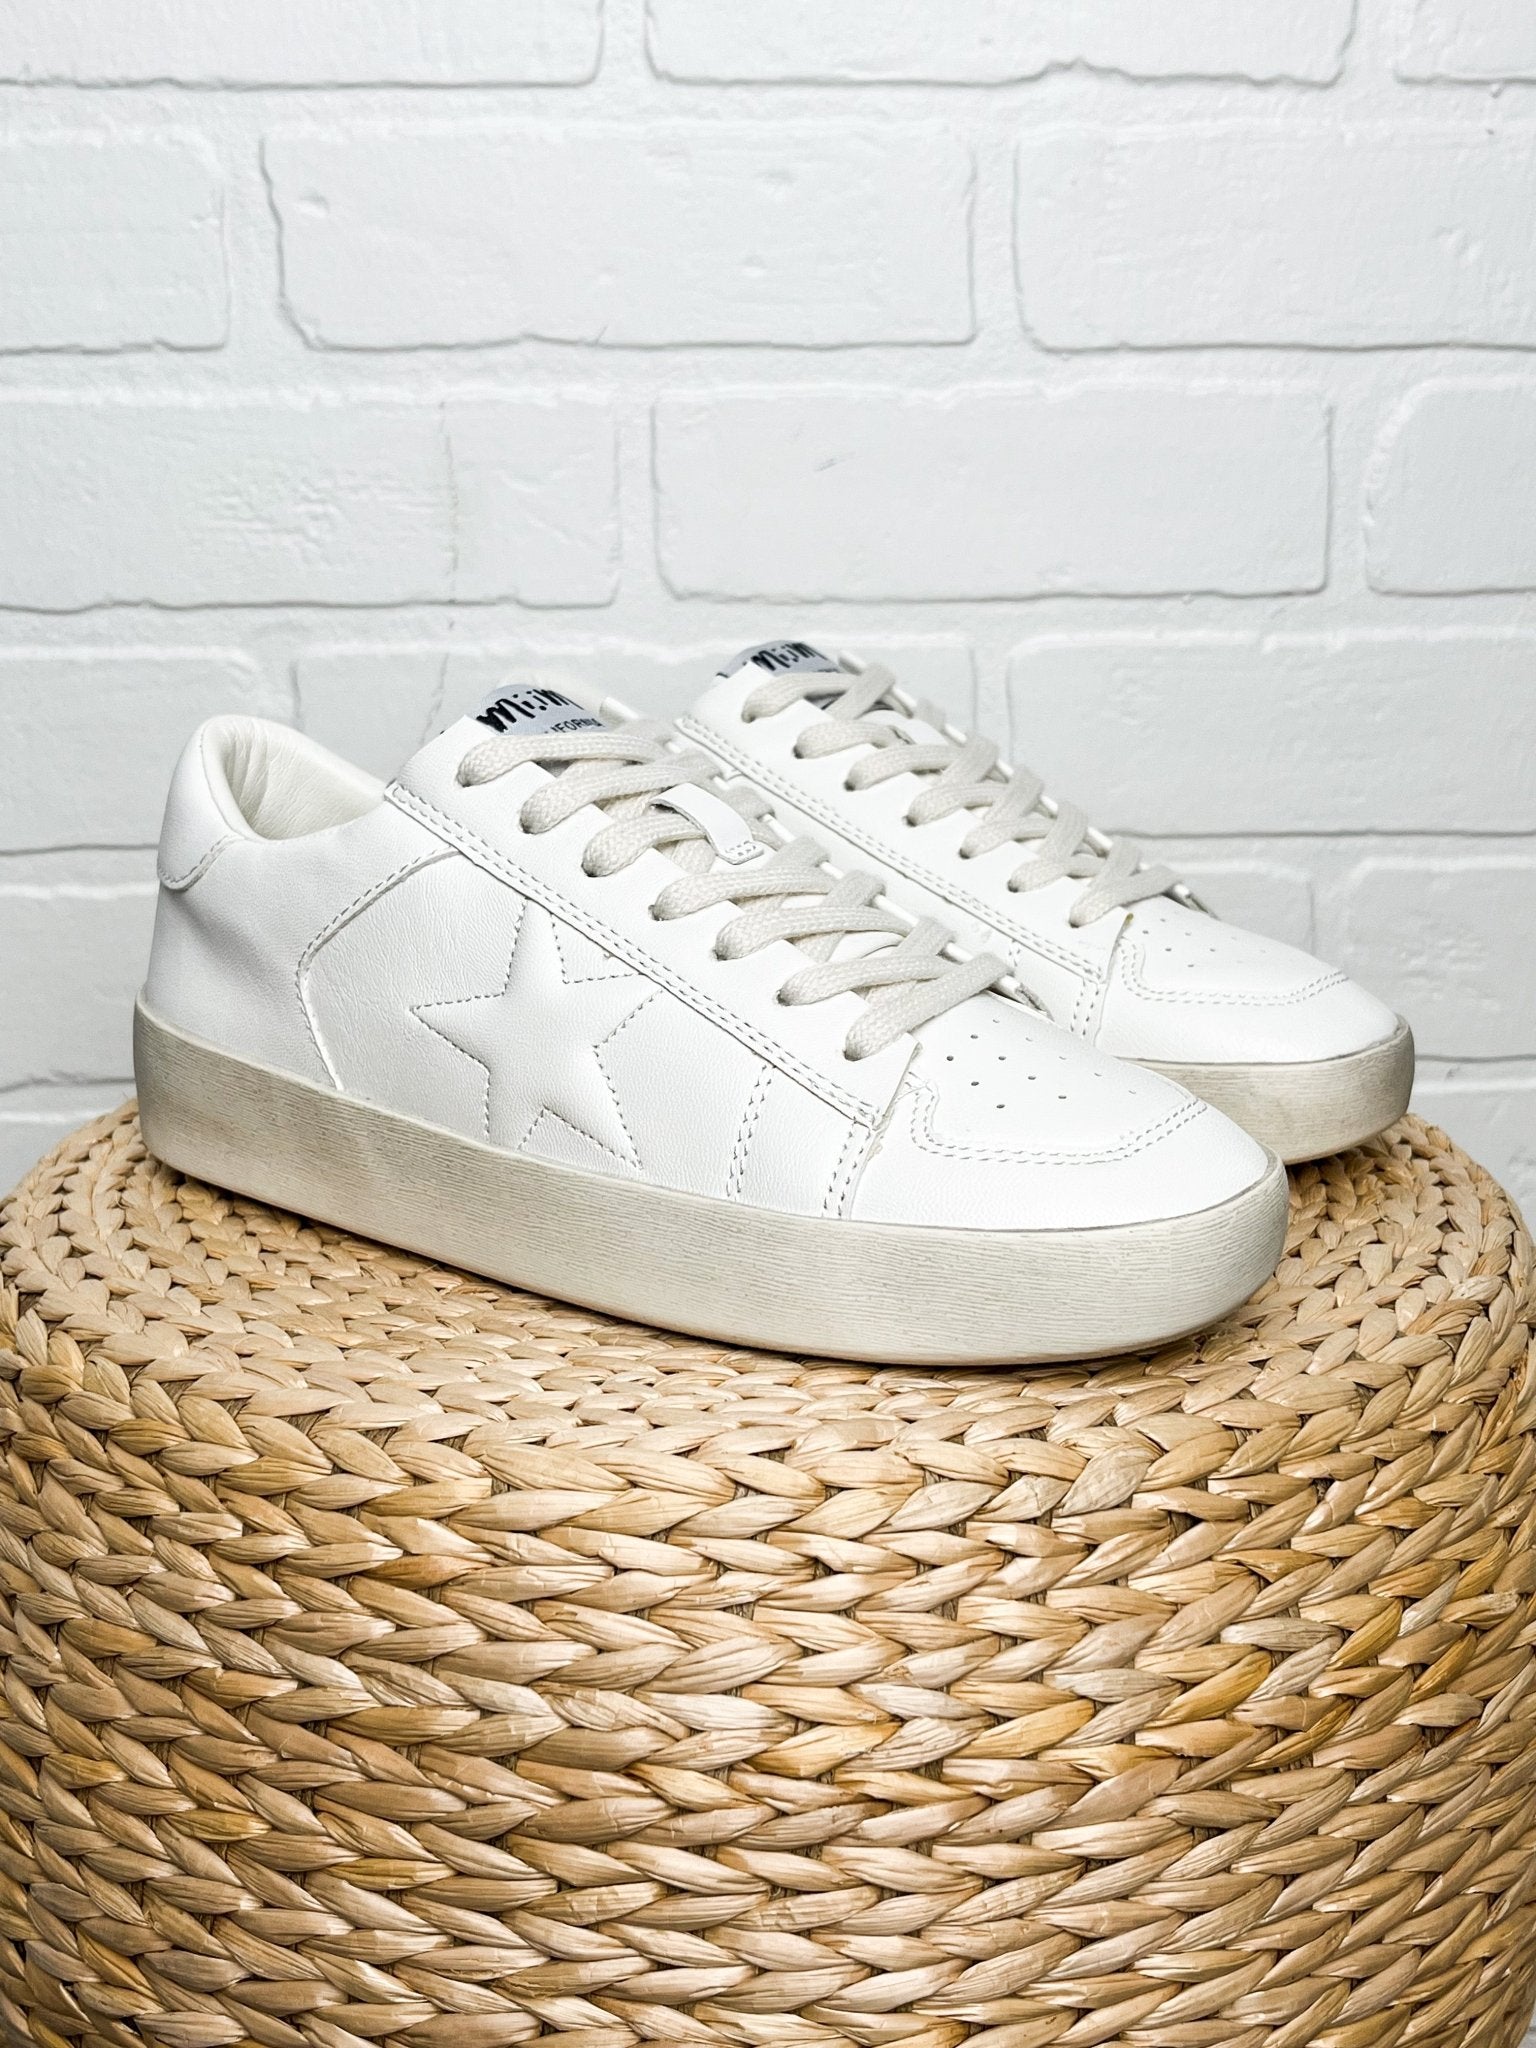 Alex star sneaker white - Trendy Shoes - Fashion Shoes at Lush Fashion Lounge Boutique in Oklahoma City